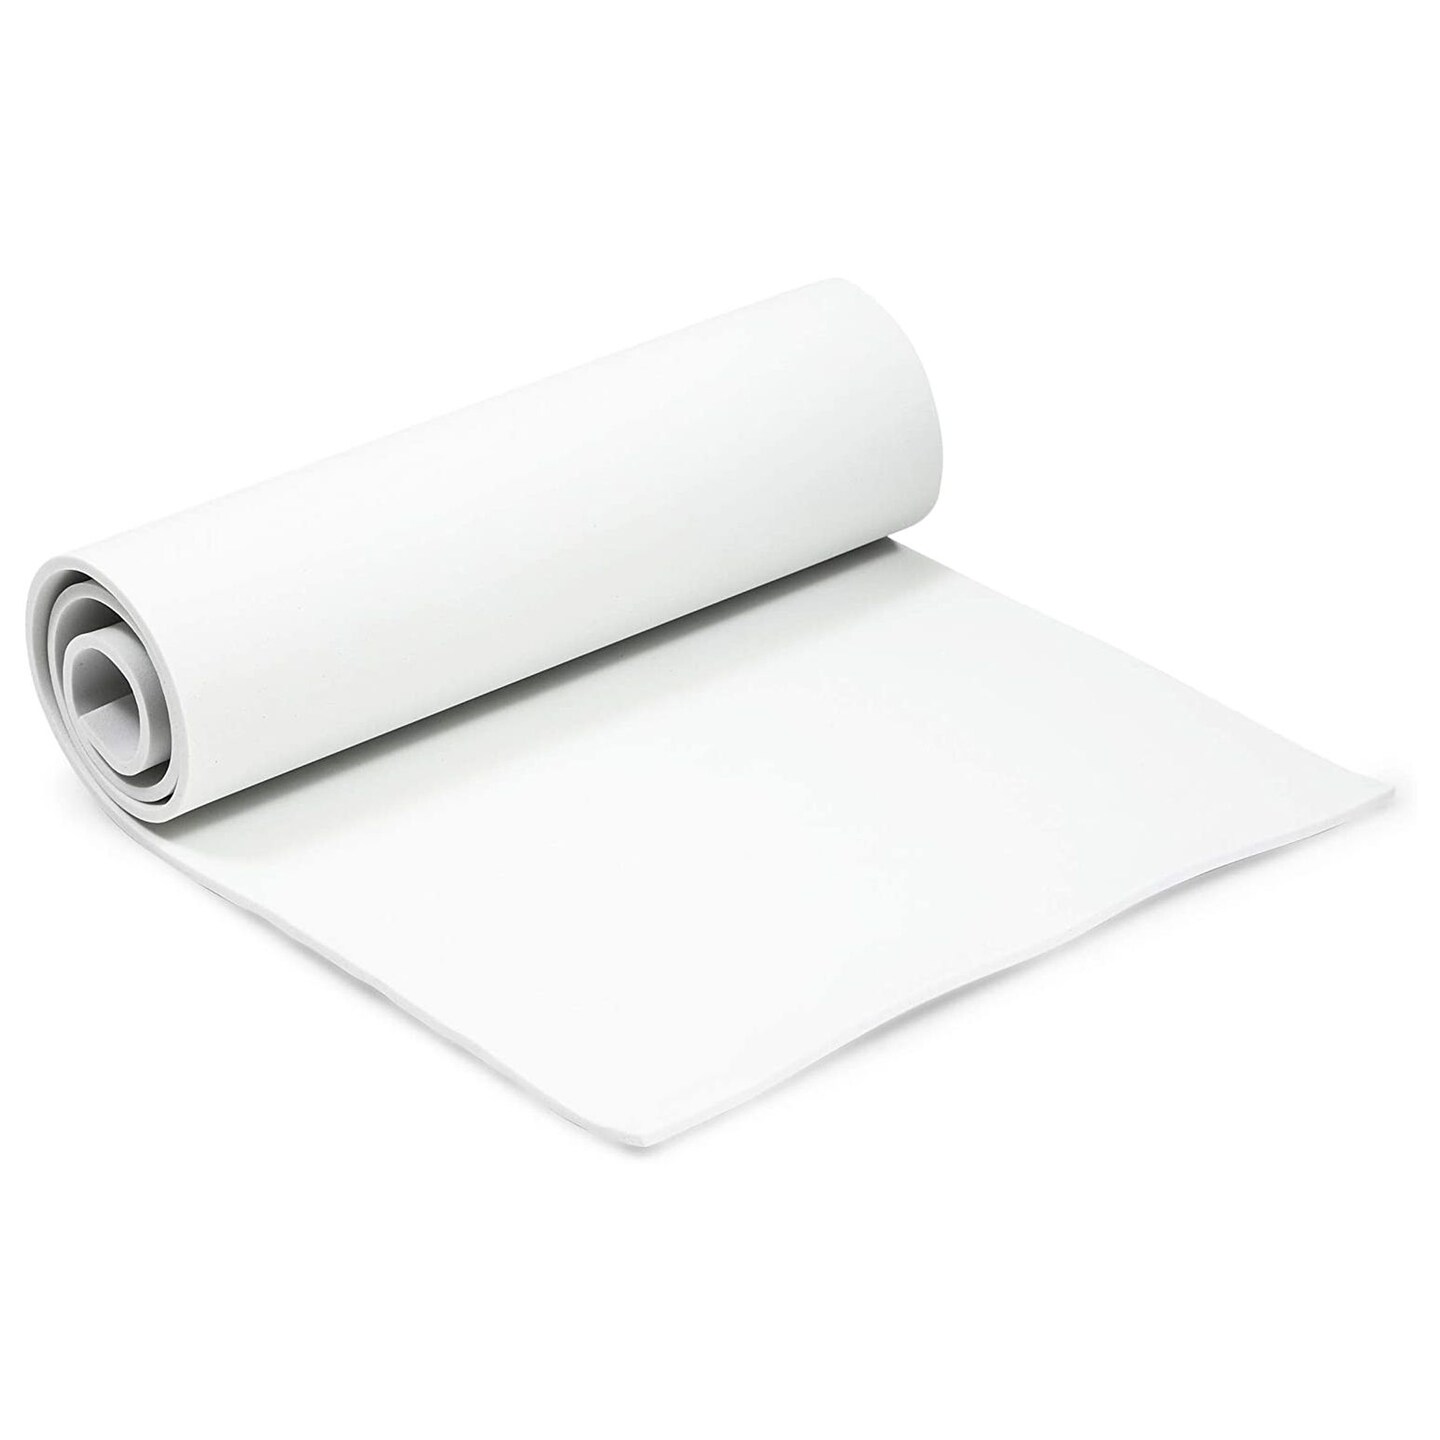 5mm EVA Foam Sheets for Cosplay Armor, Costumes, Arts and Crafts